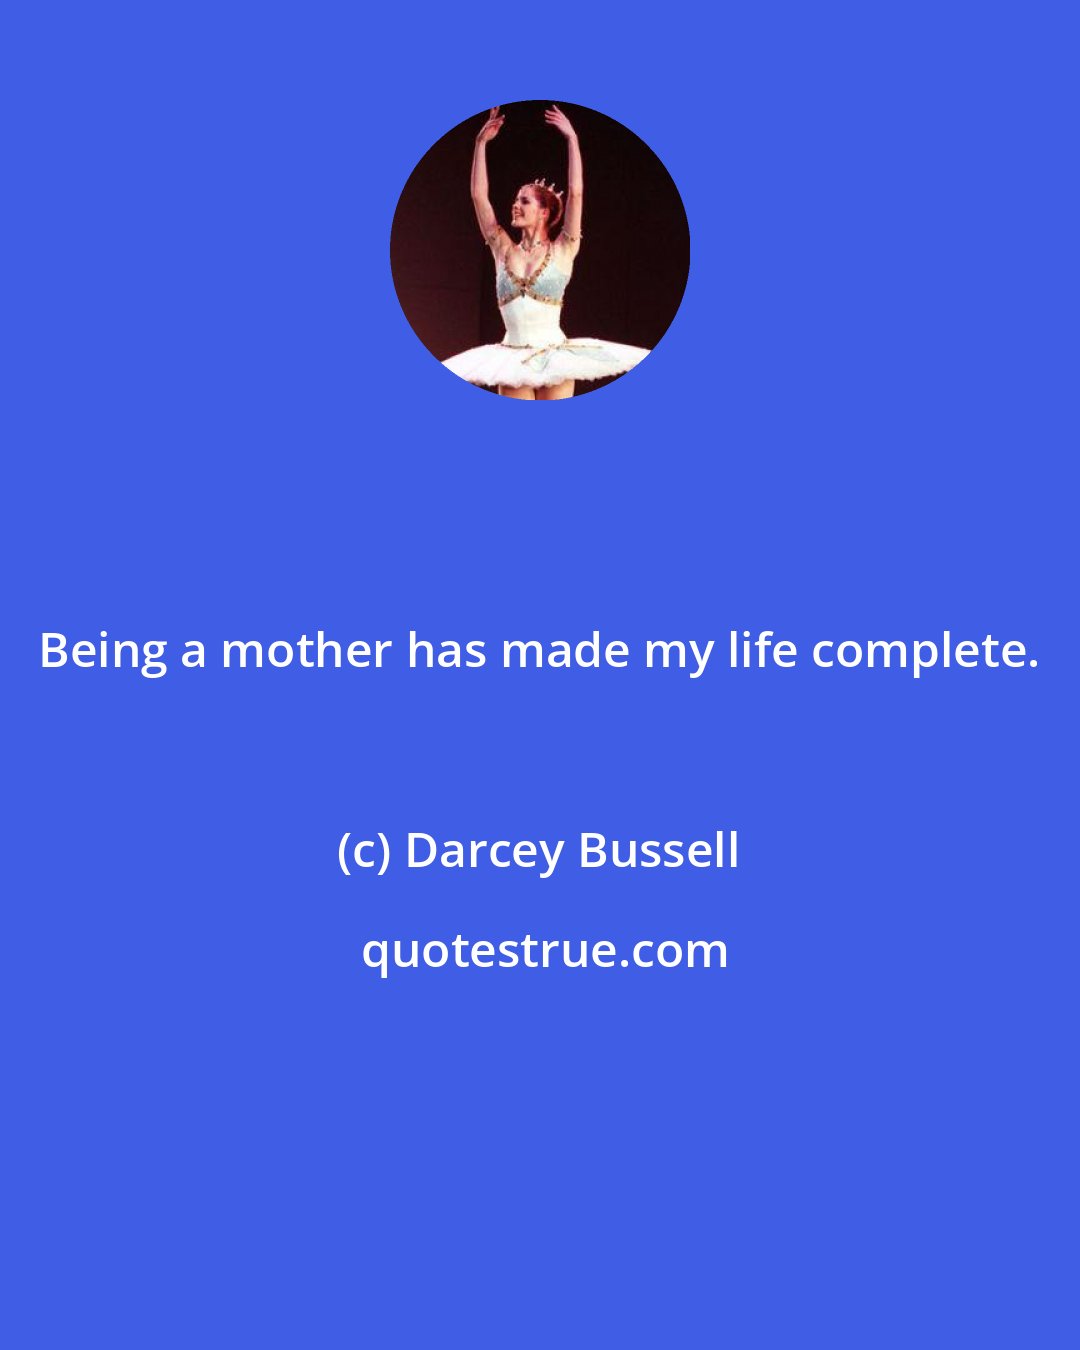 Darcey Bussell: Being a mother has made my life complete.